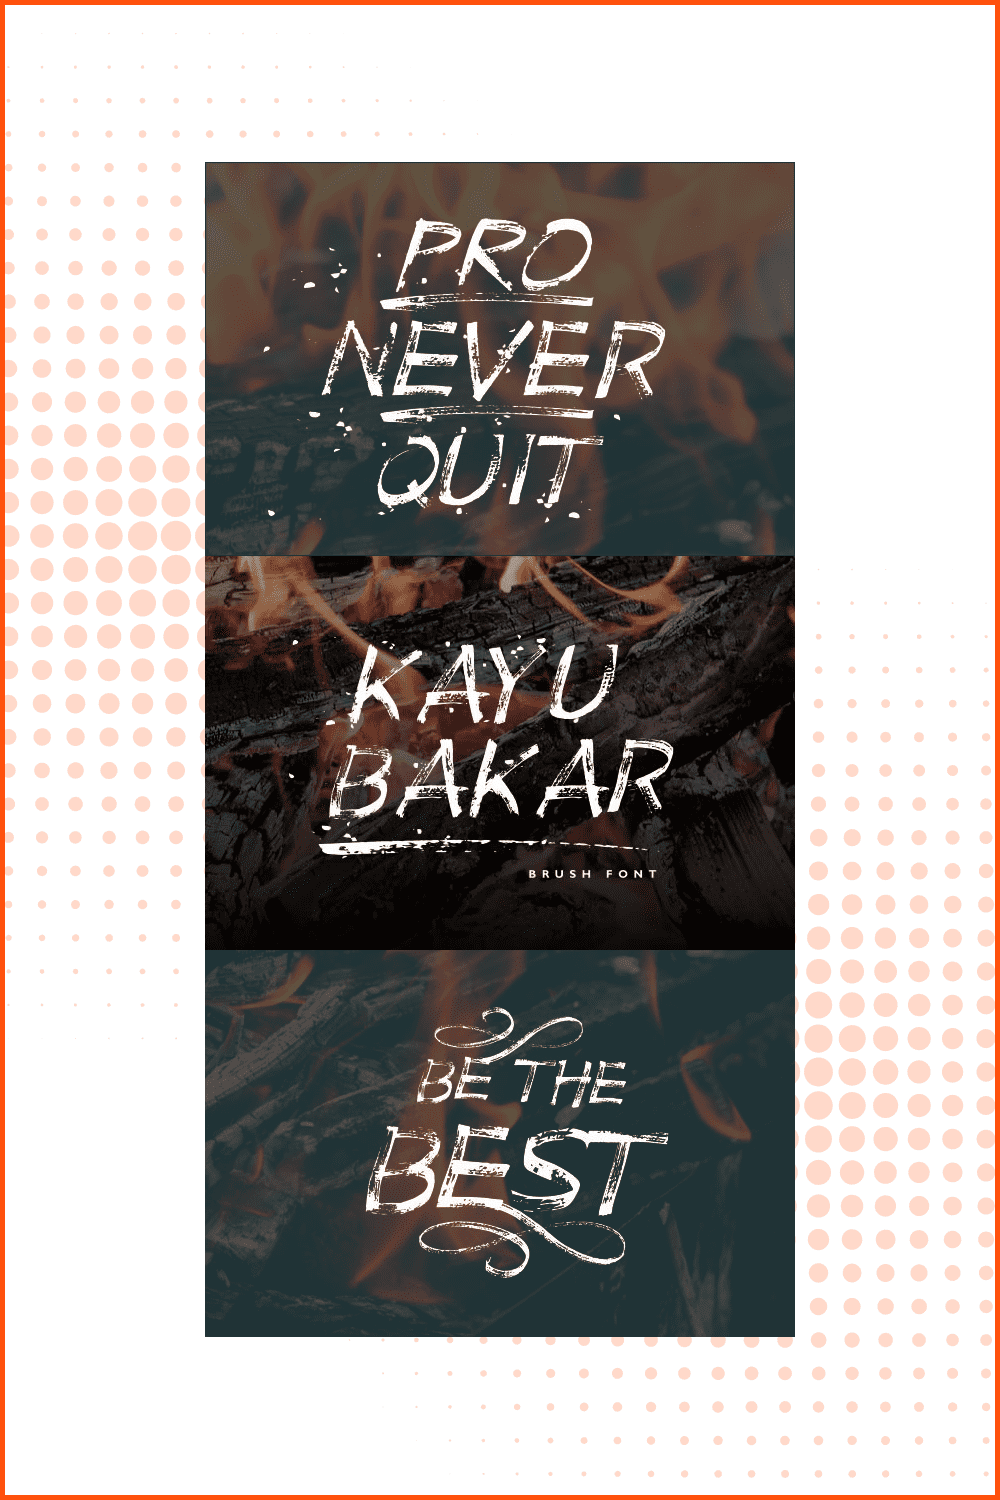 Collage with fonts made by Aan Kurniawan.